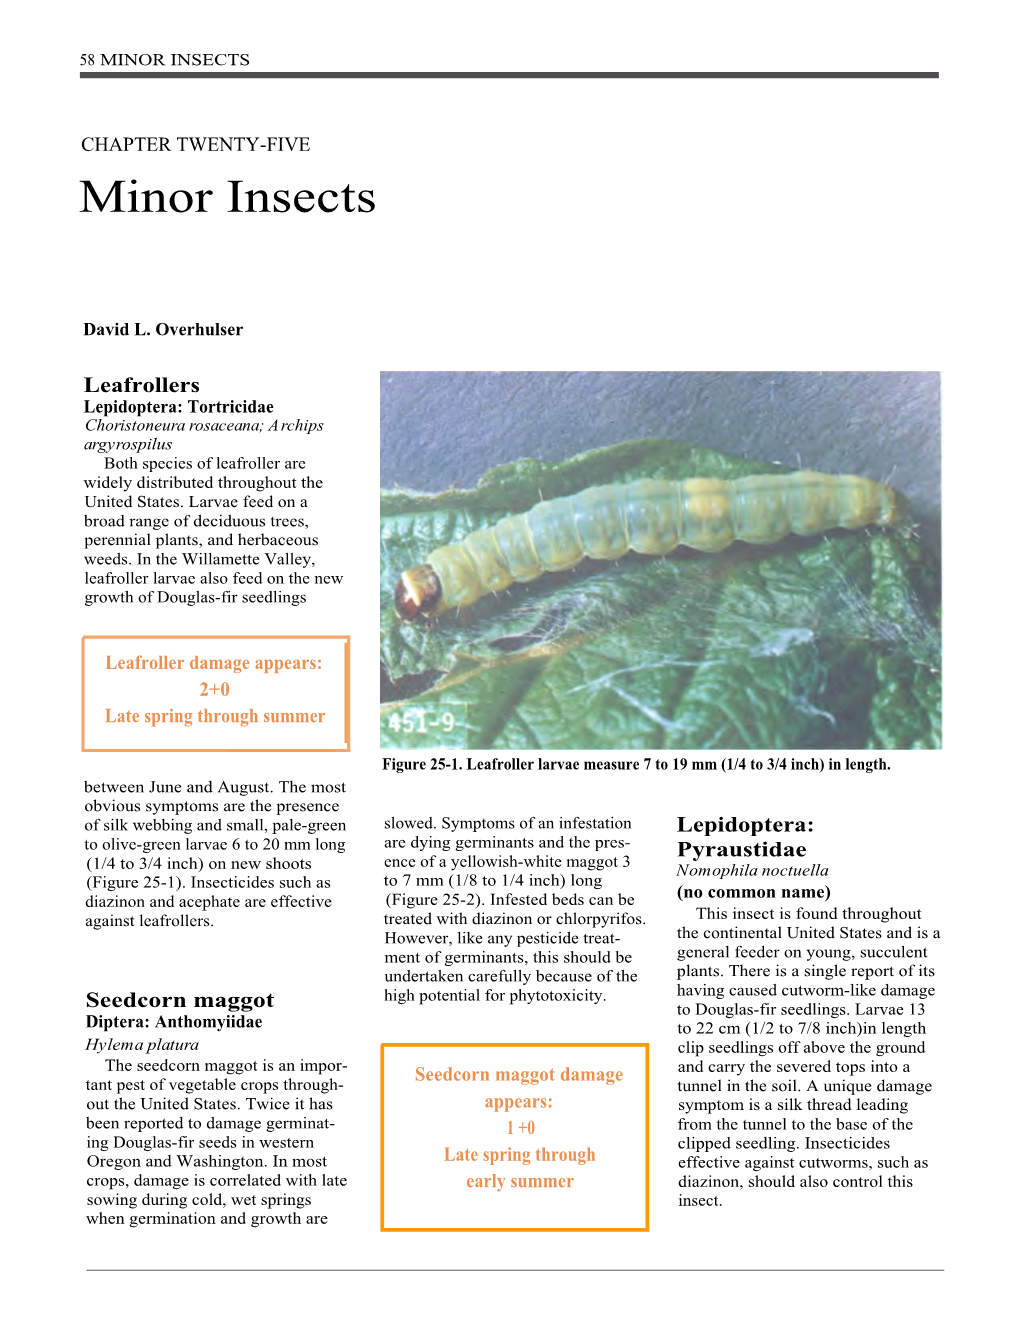 Minor Insects